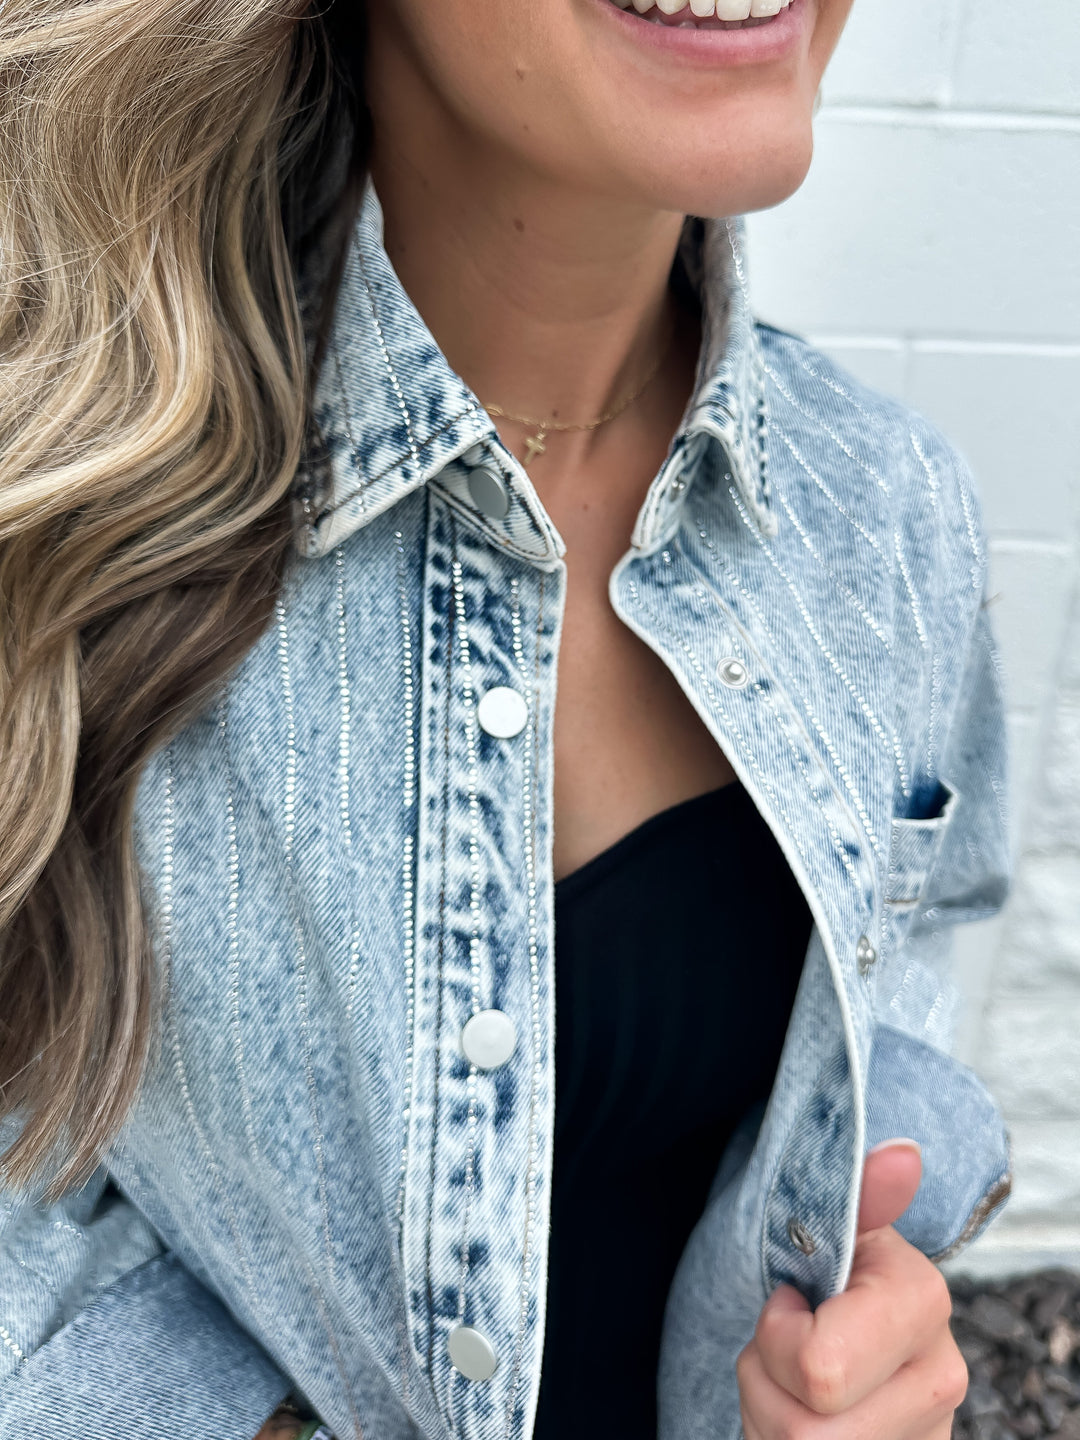 The Stand Out Rhinestone Denim Jacket